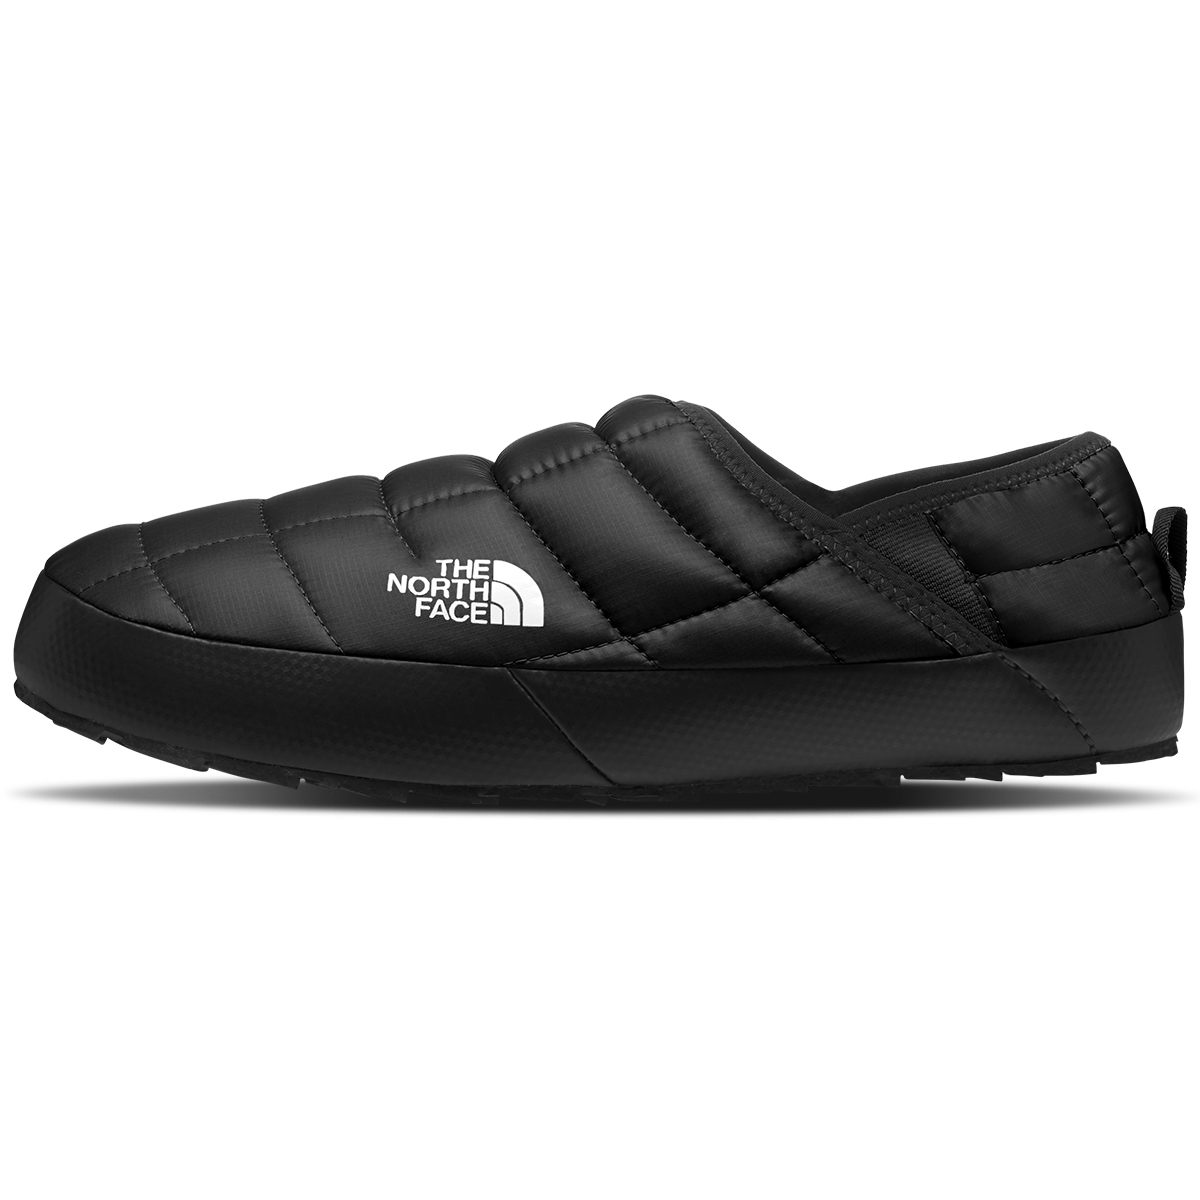 The North Face Men's Thermoball Traction V Mules - Size 12